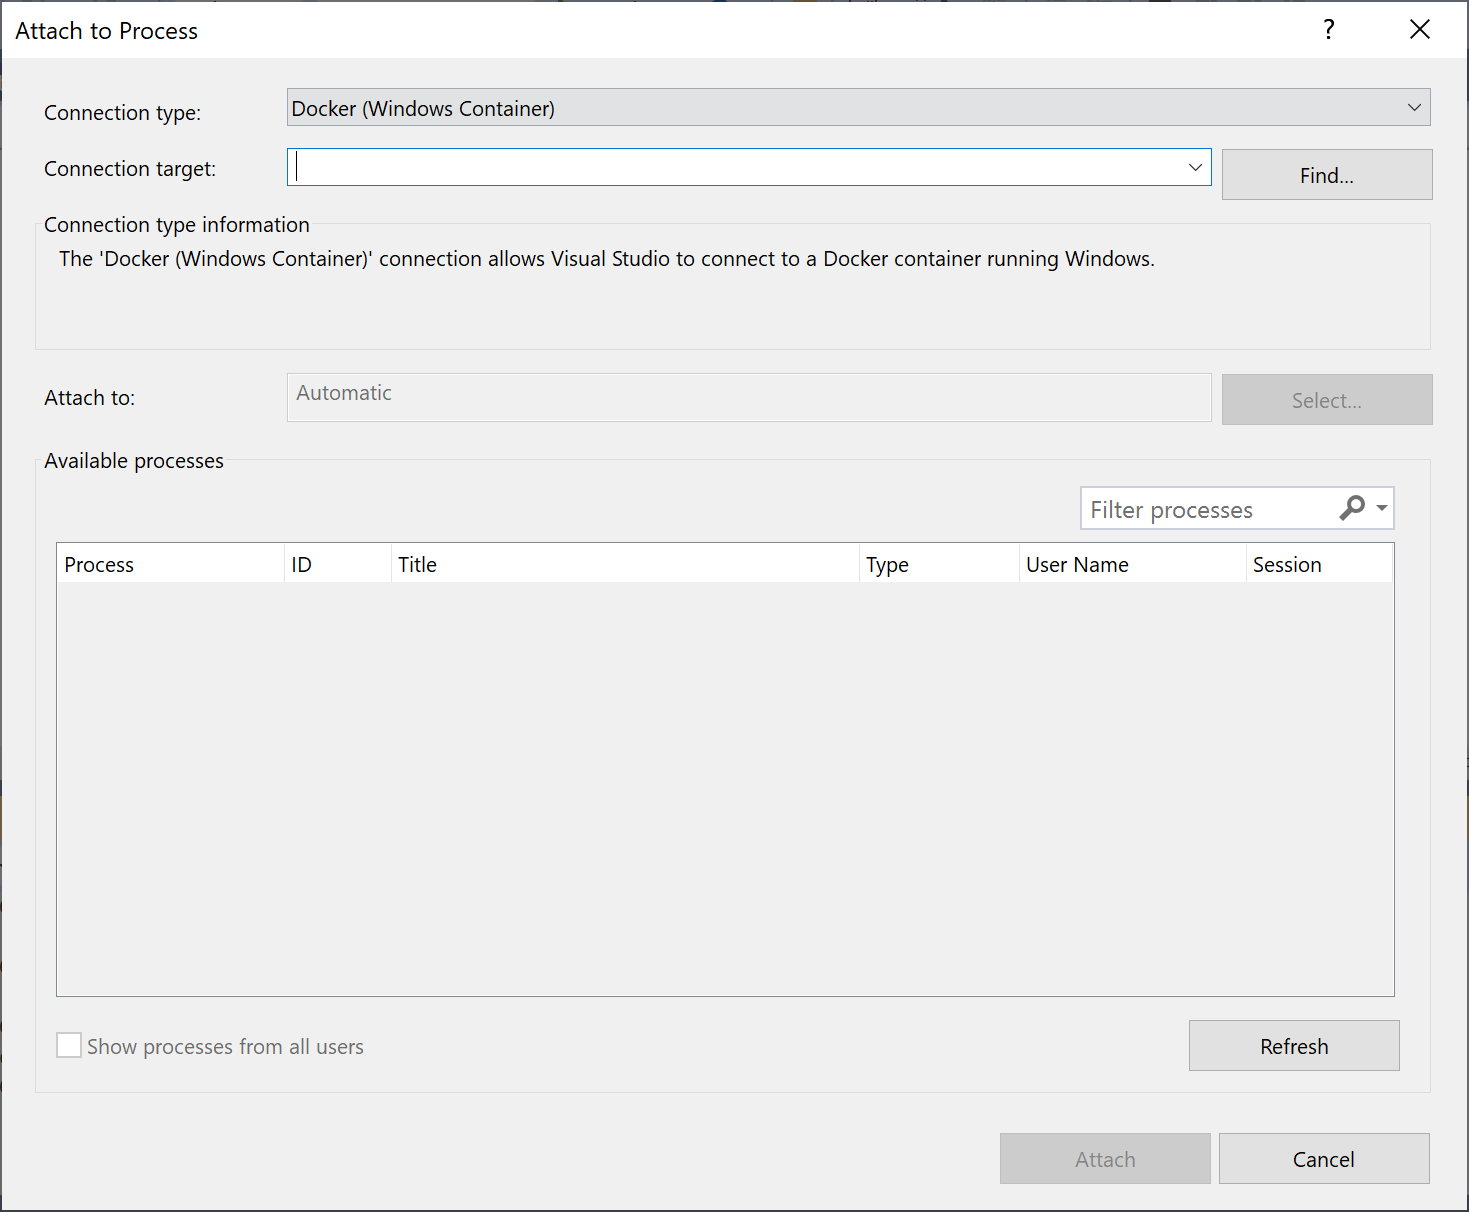 Screenshot of the Attach to Process dialog in Visual Studio showing a Connection type of Docker (Windows Container).